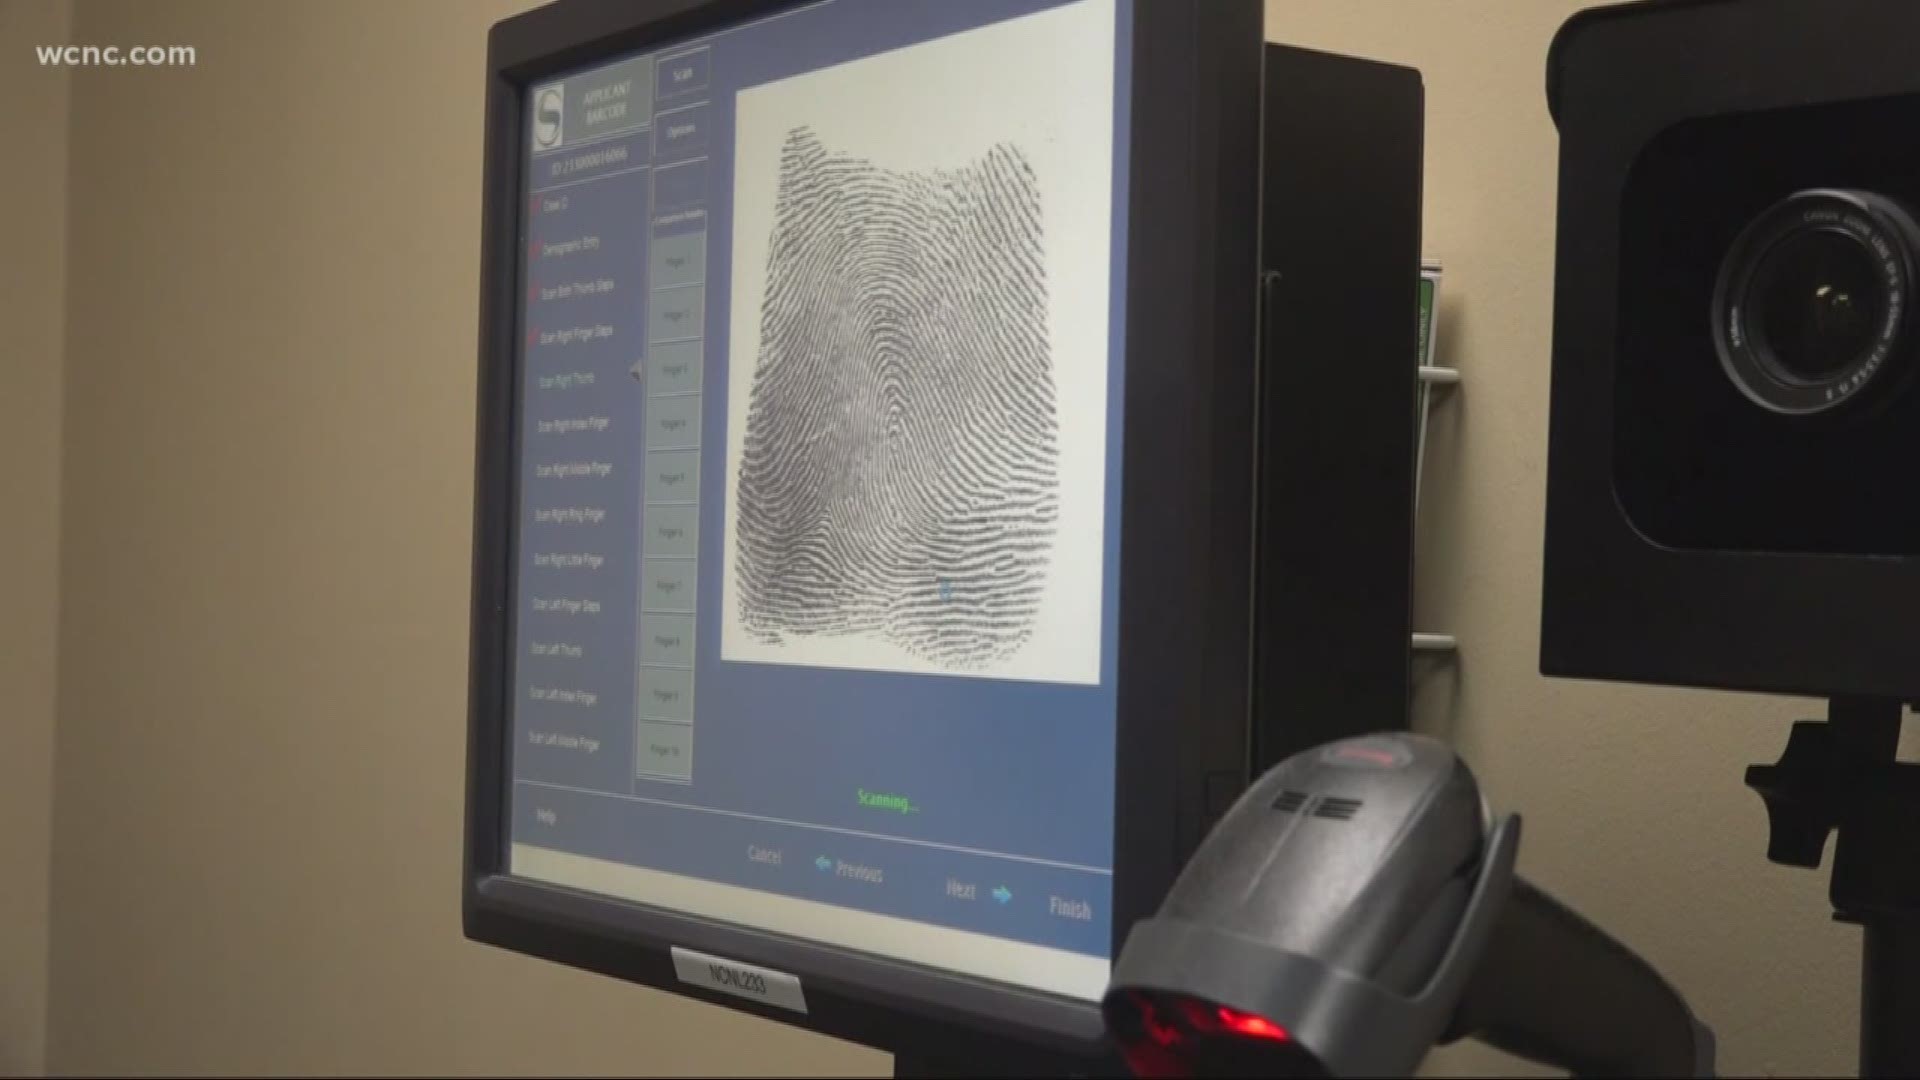 CMS said thousands of employees weren't fingerprinted because the background checking service it hired didn't include that security feature.
The district is now telling those employees they need to be fingerprinted before going back to class.